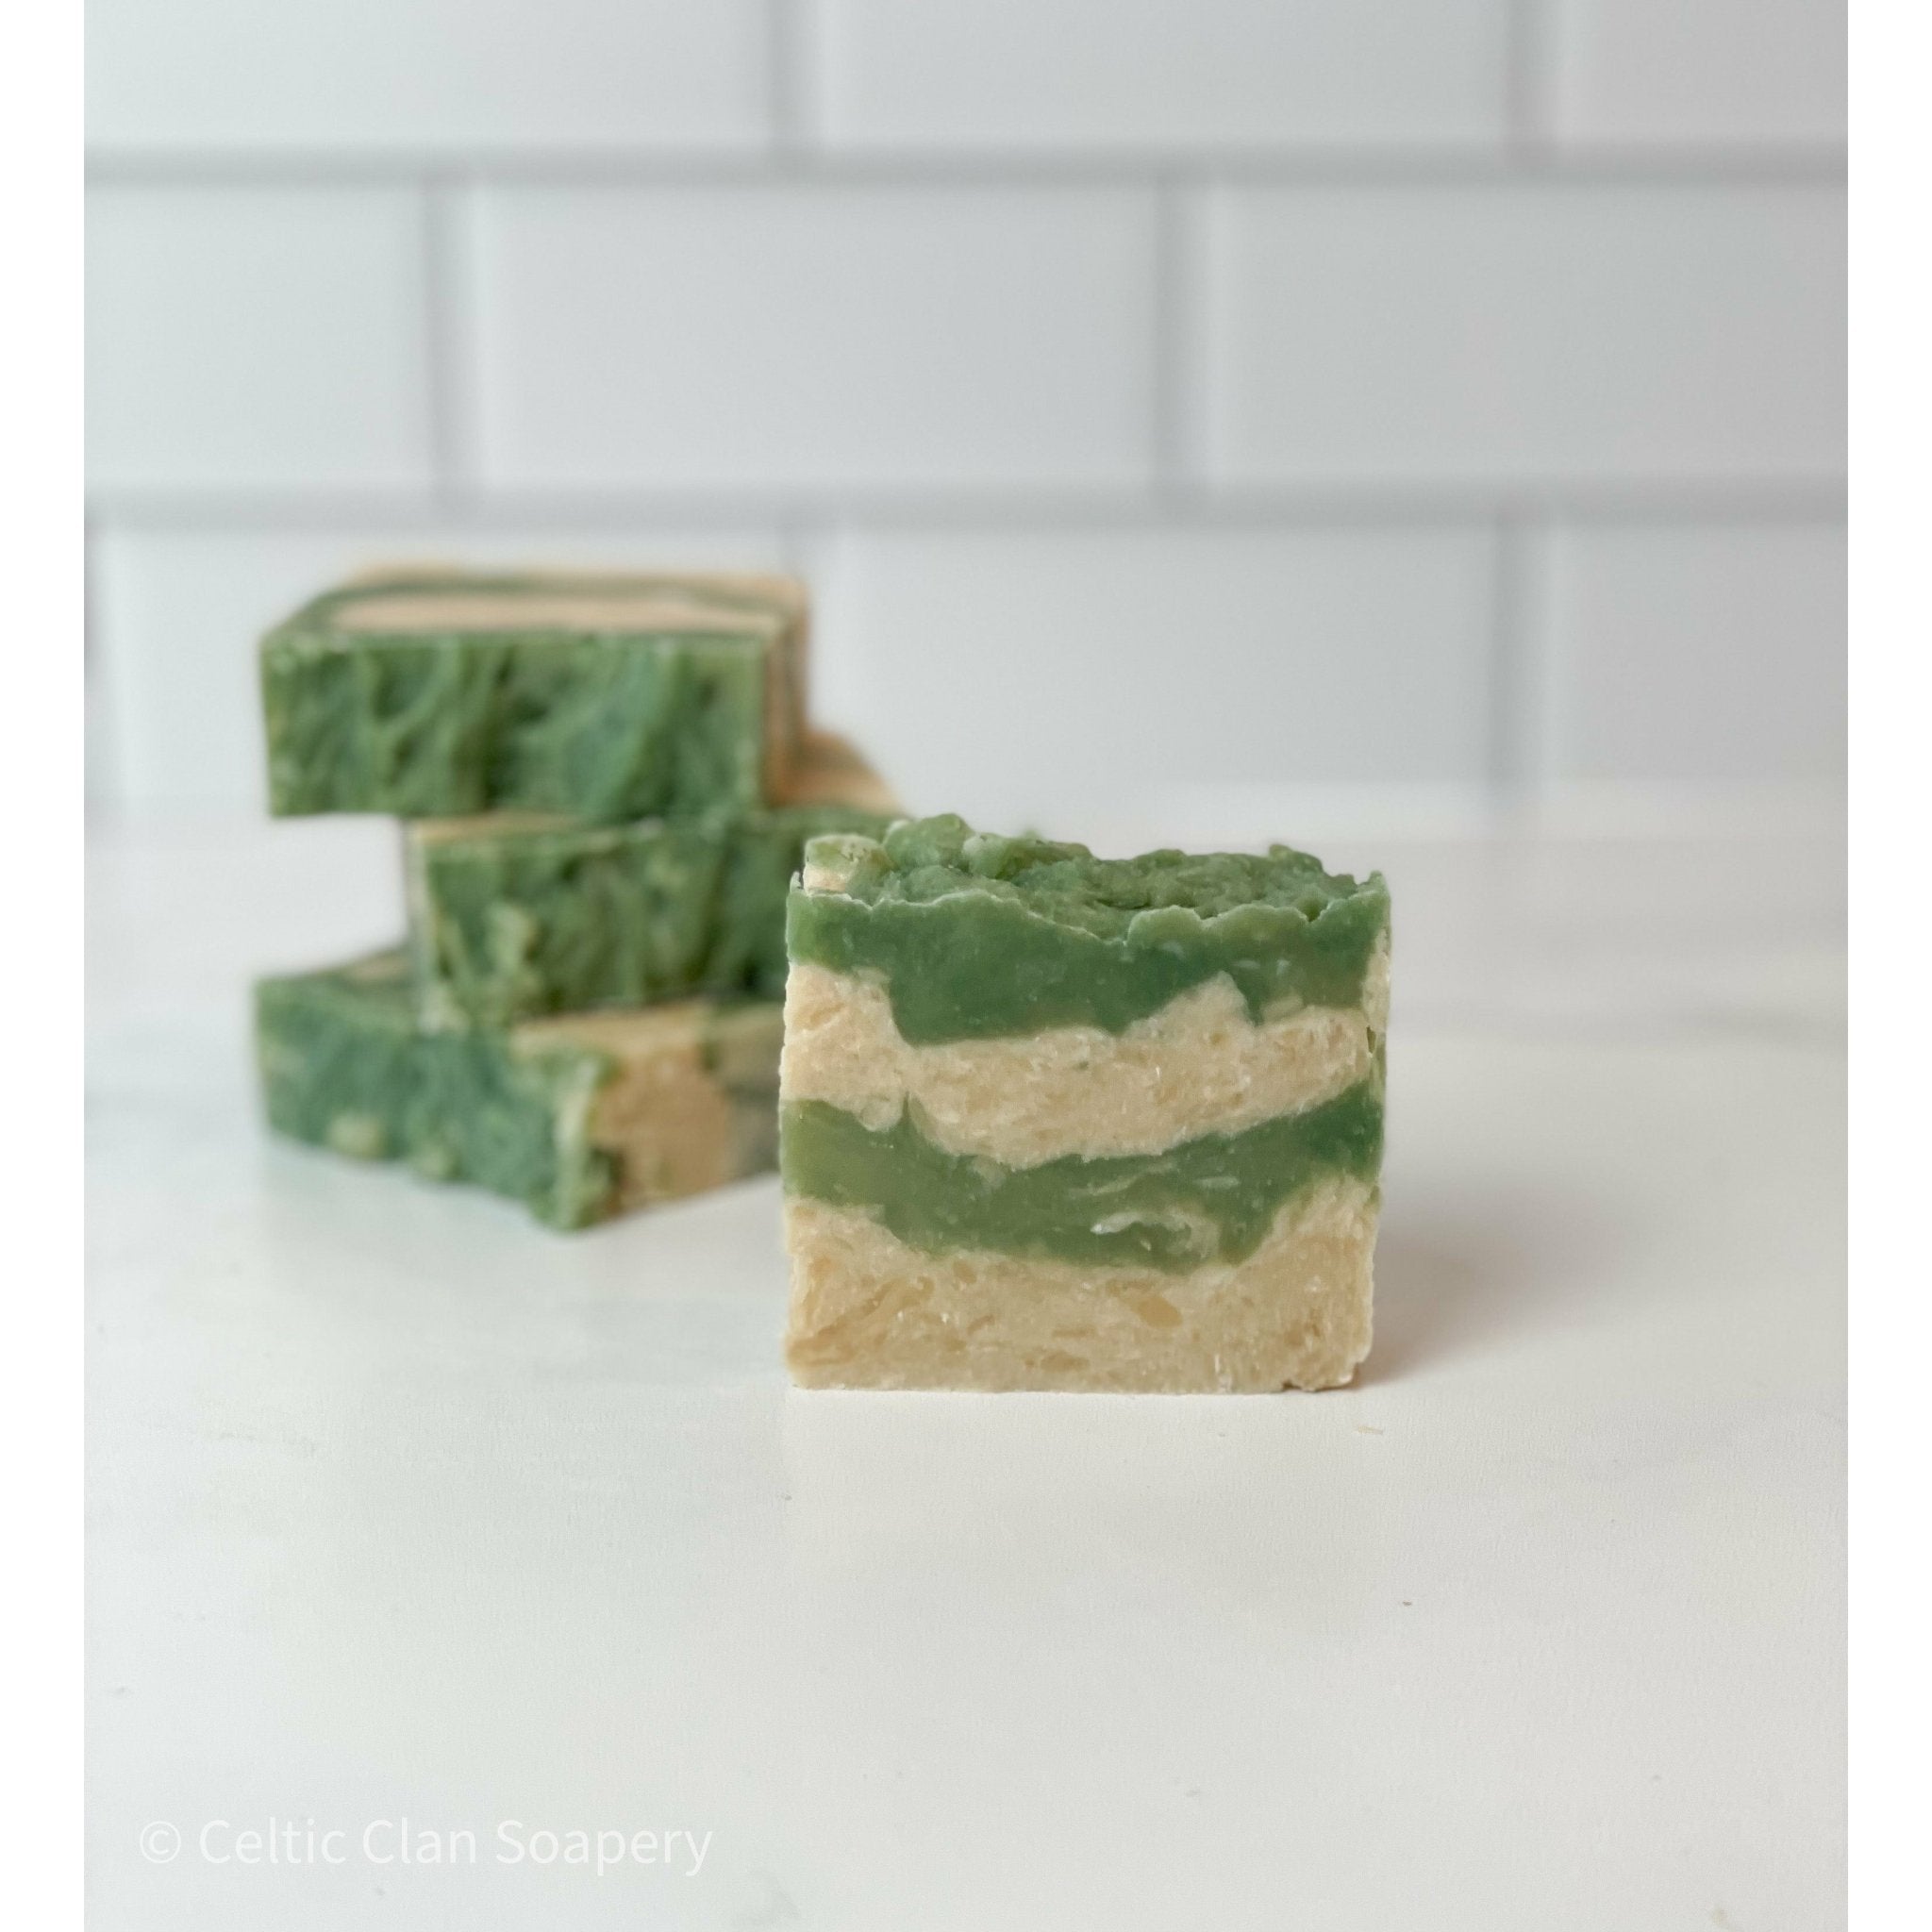 Assorted Essential Oil Soap | Handmade French Milled | Goat Milk & Aloe Vera - Celtic Clan Soapery LLC